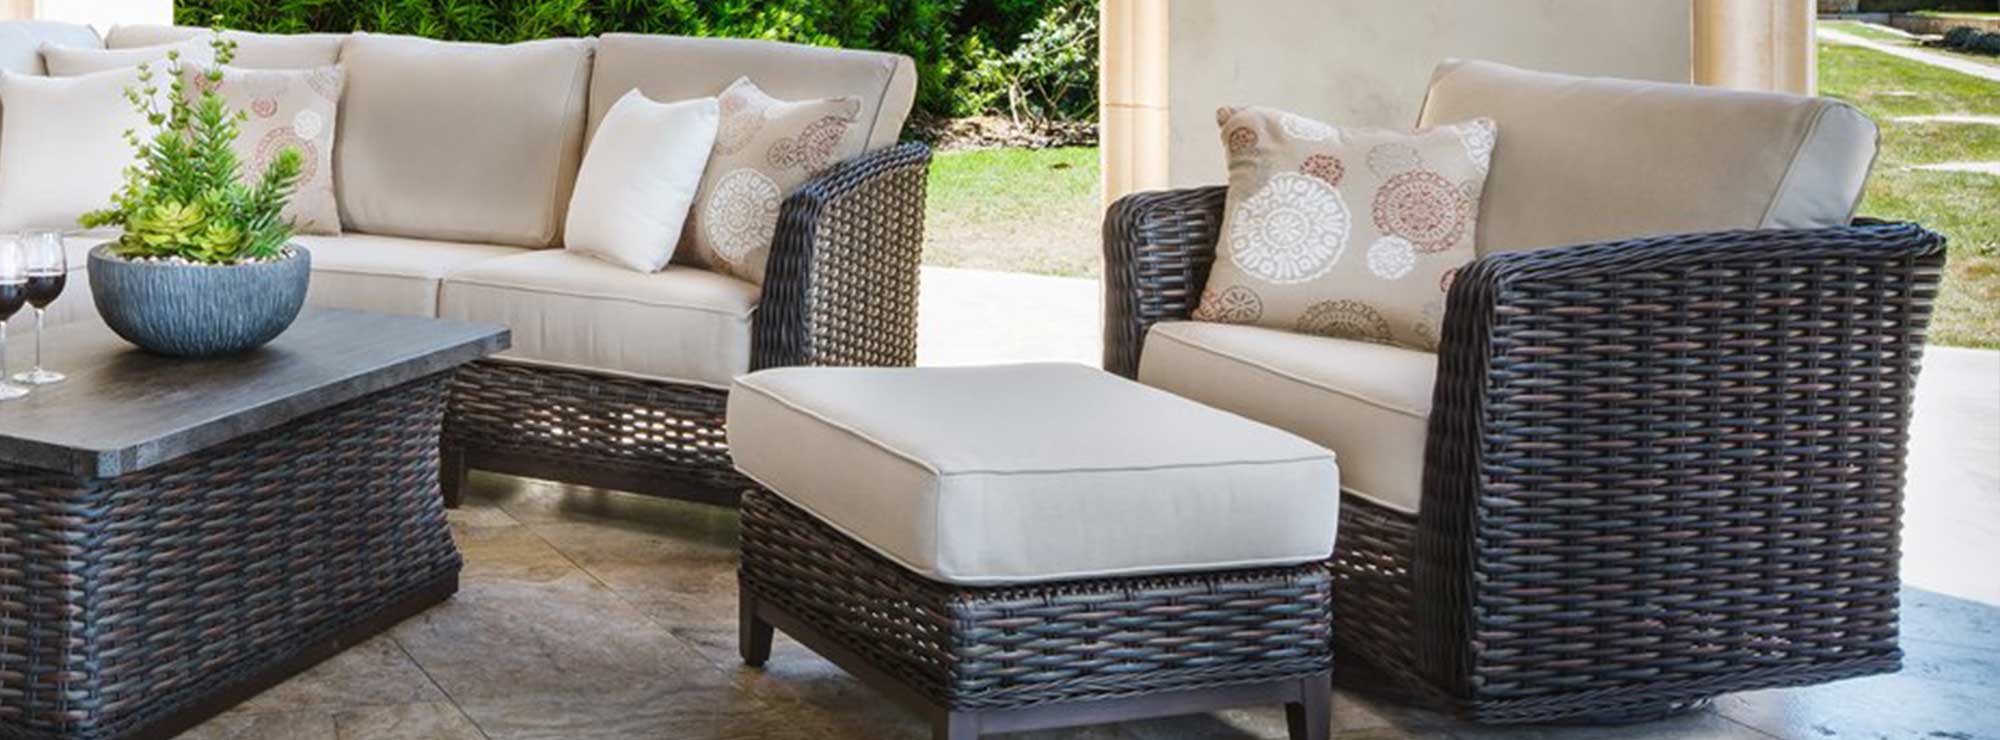 Catalina woven outdoor furniture collection 